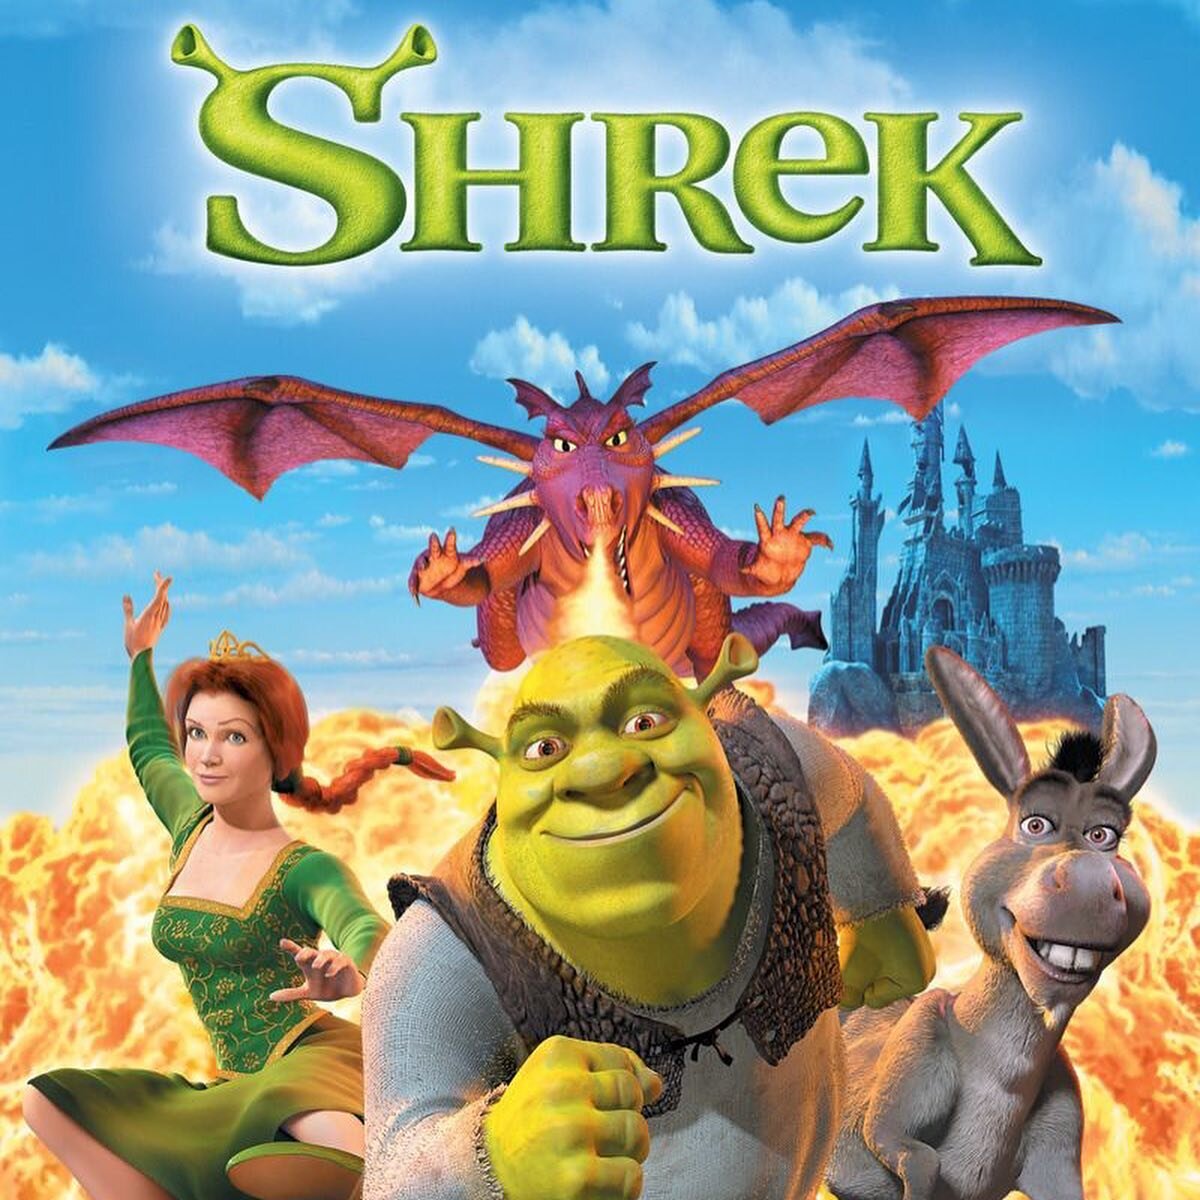 Shrek Bingo is tonight!

Sunday, 2/7 8:22pm
tepxi.mit.edu/zoom

Nostalgic for the best cinematic hit of the early 2000s? Come watch Shrek with us and play our custom bingo board for a chance to win an extra special limited edition super surprise priz